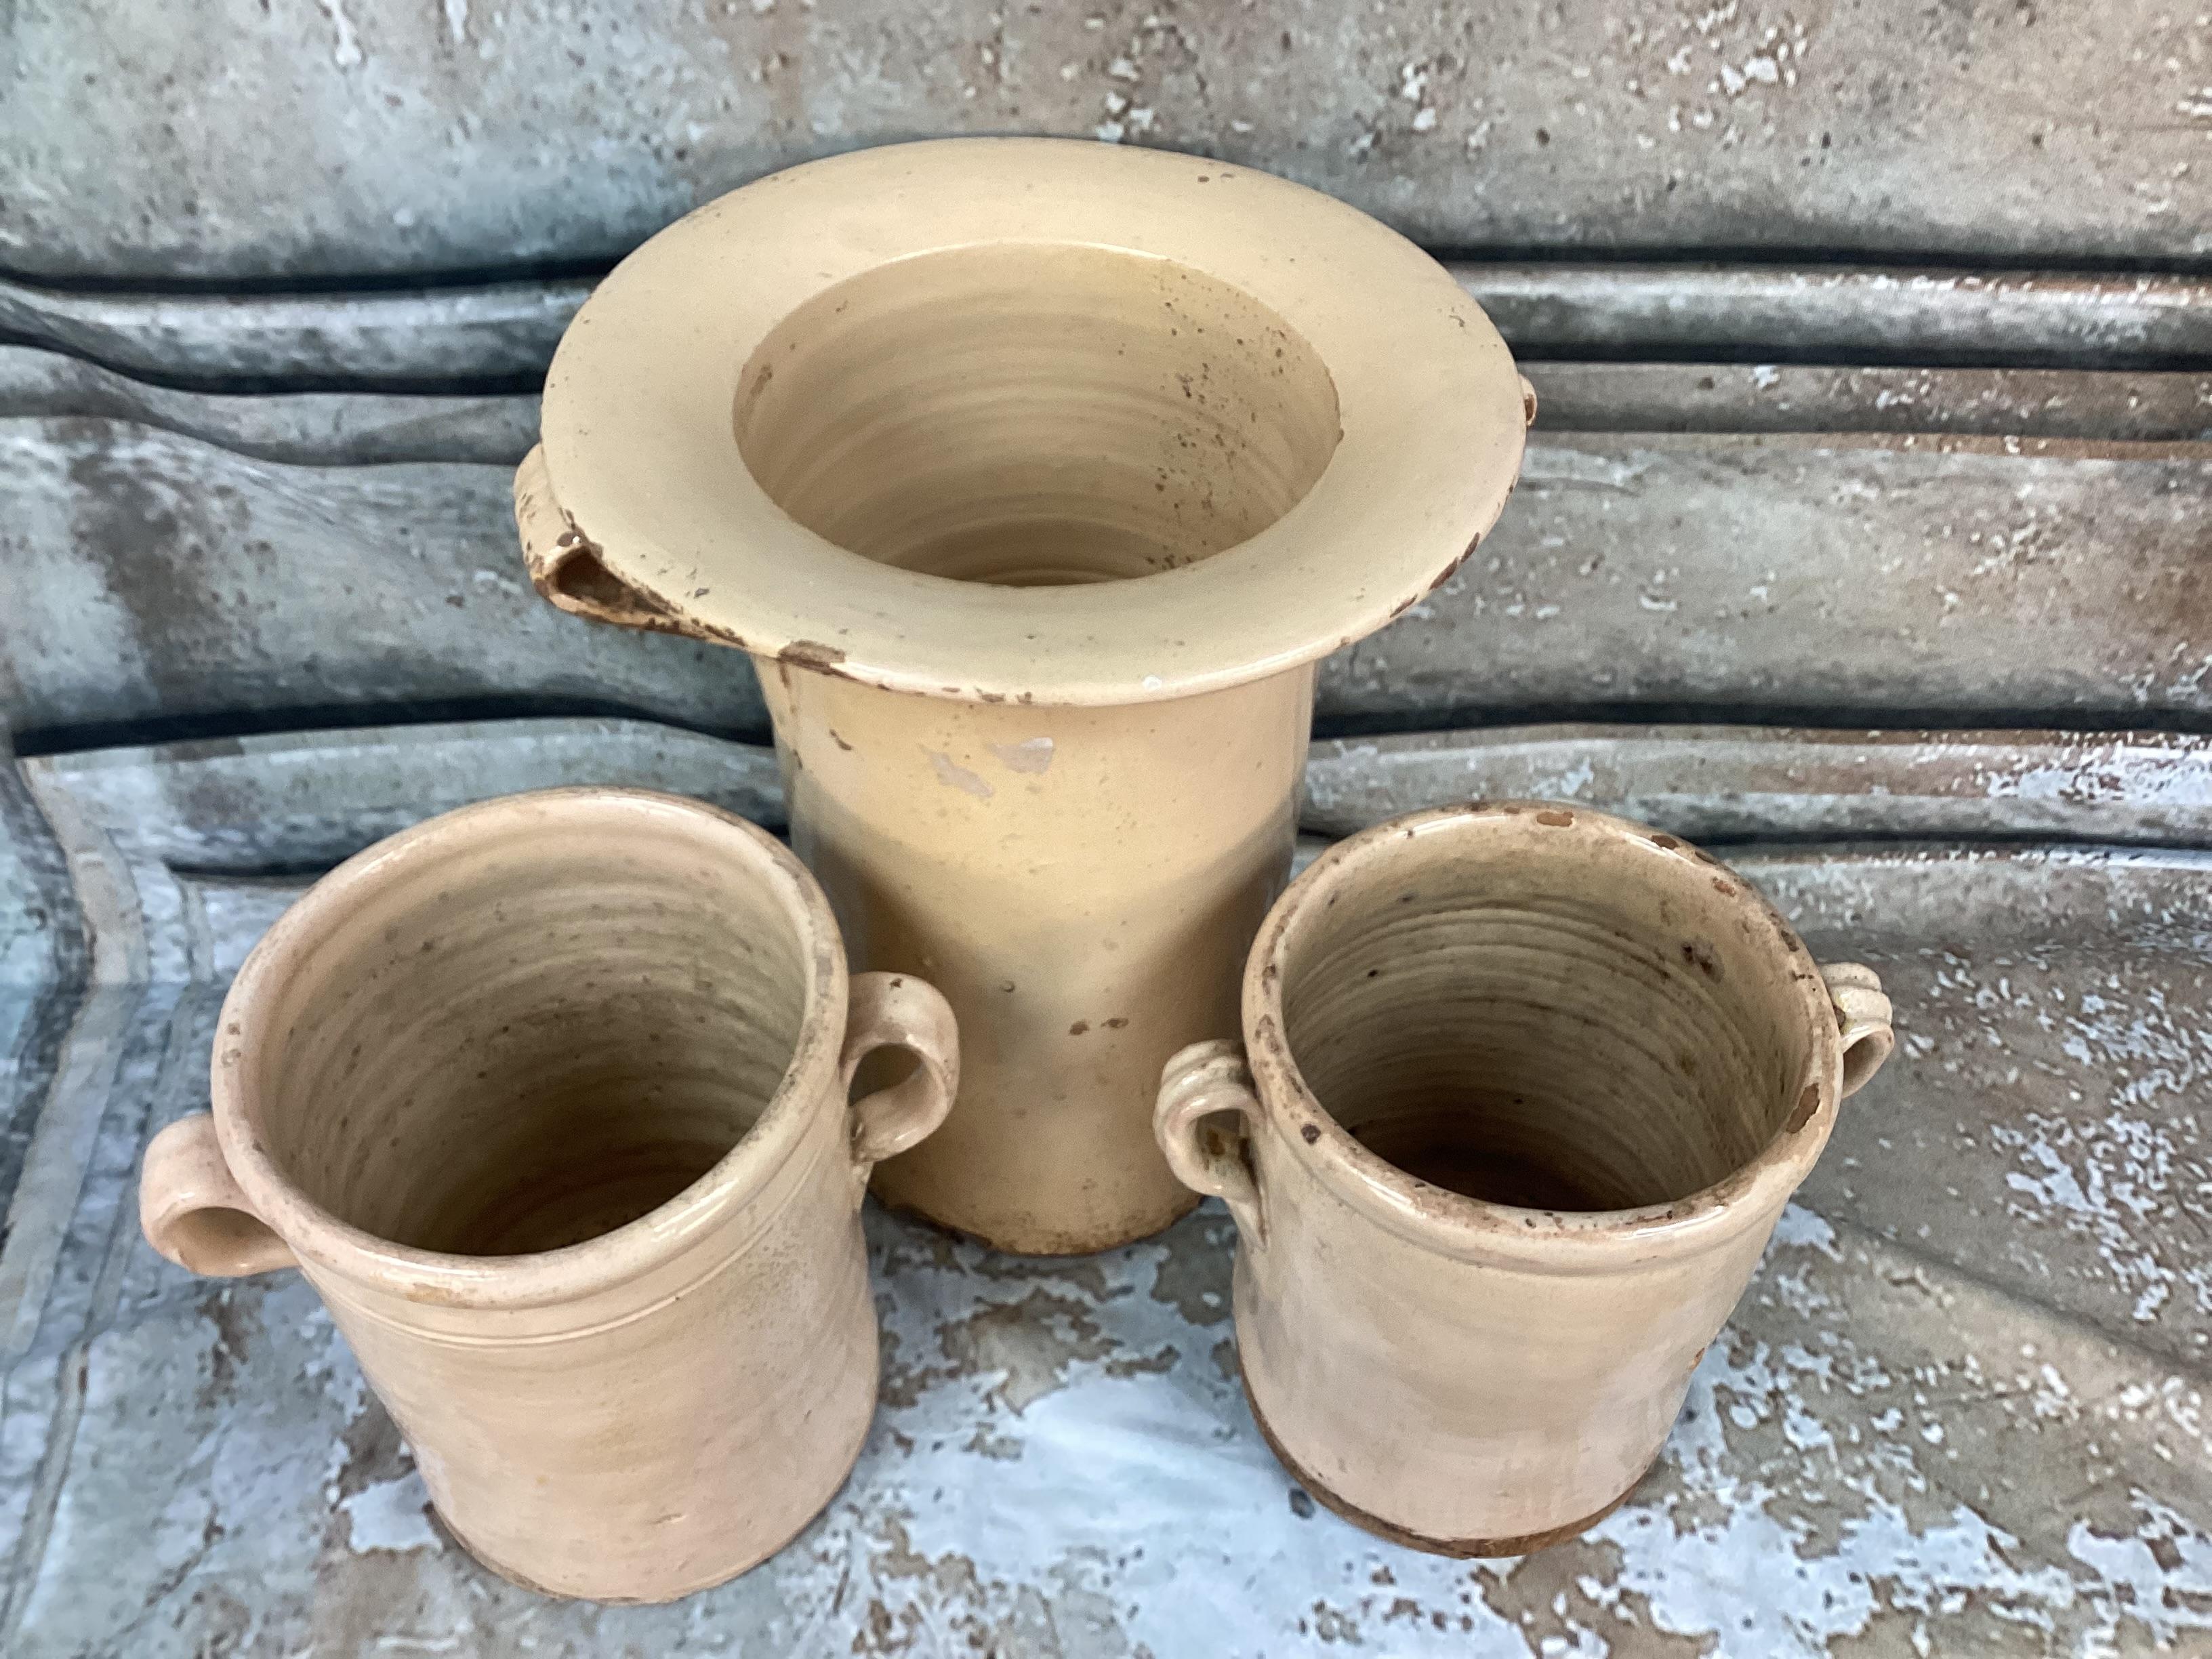 Fabulous set of three 19th Century Italian ceramic chiminea preserve pots with handles. These pots were used to preserve food such as fruits, meat or vegetables. They were designed to be used in conjunction with wood-burning stove or fireplace as